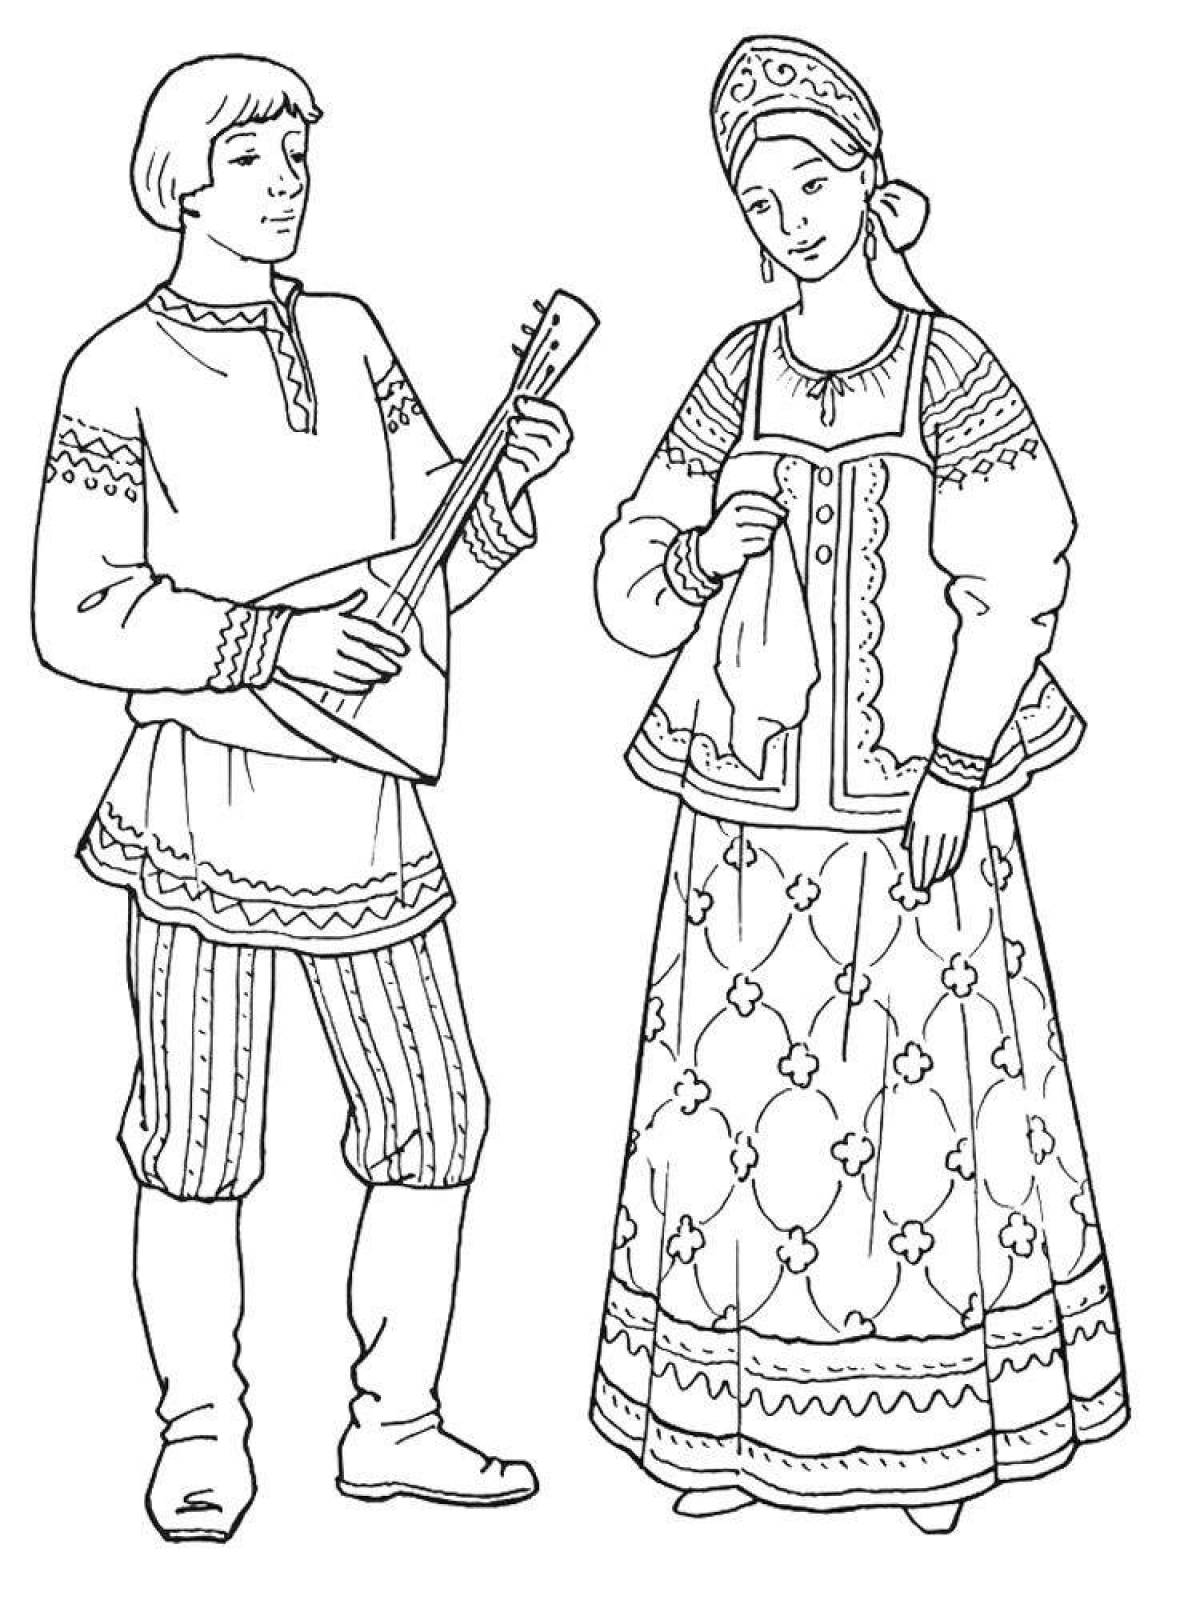 Coloring page intricate male Russian folk costume